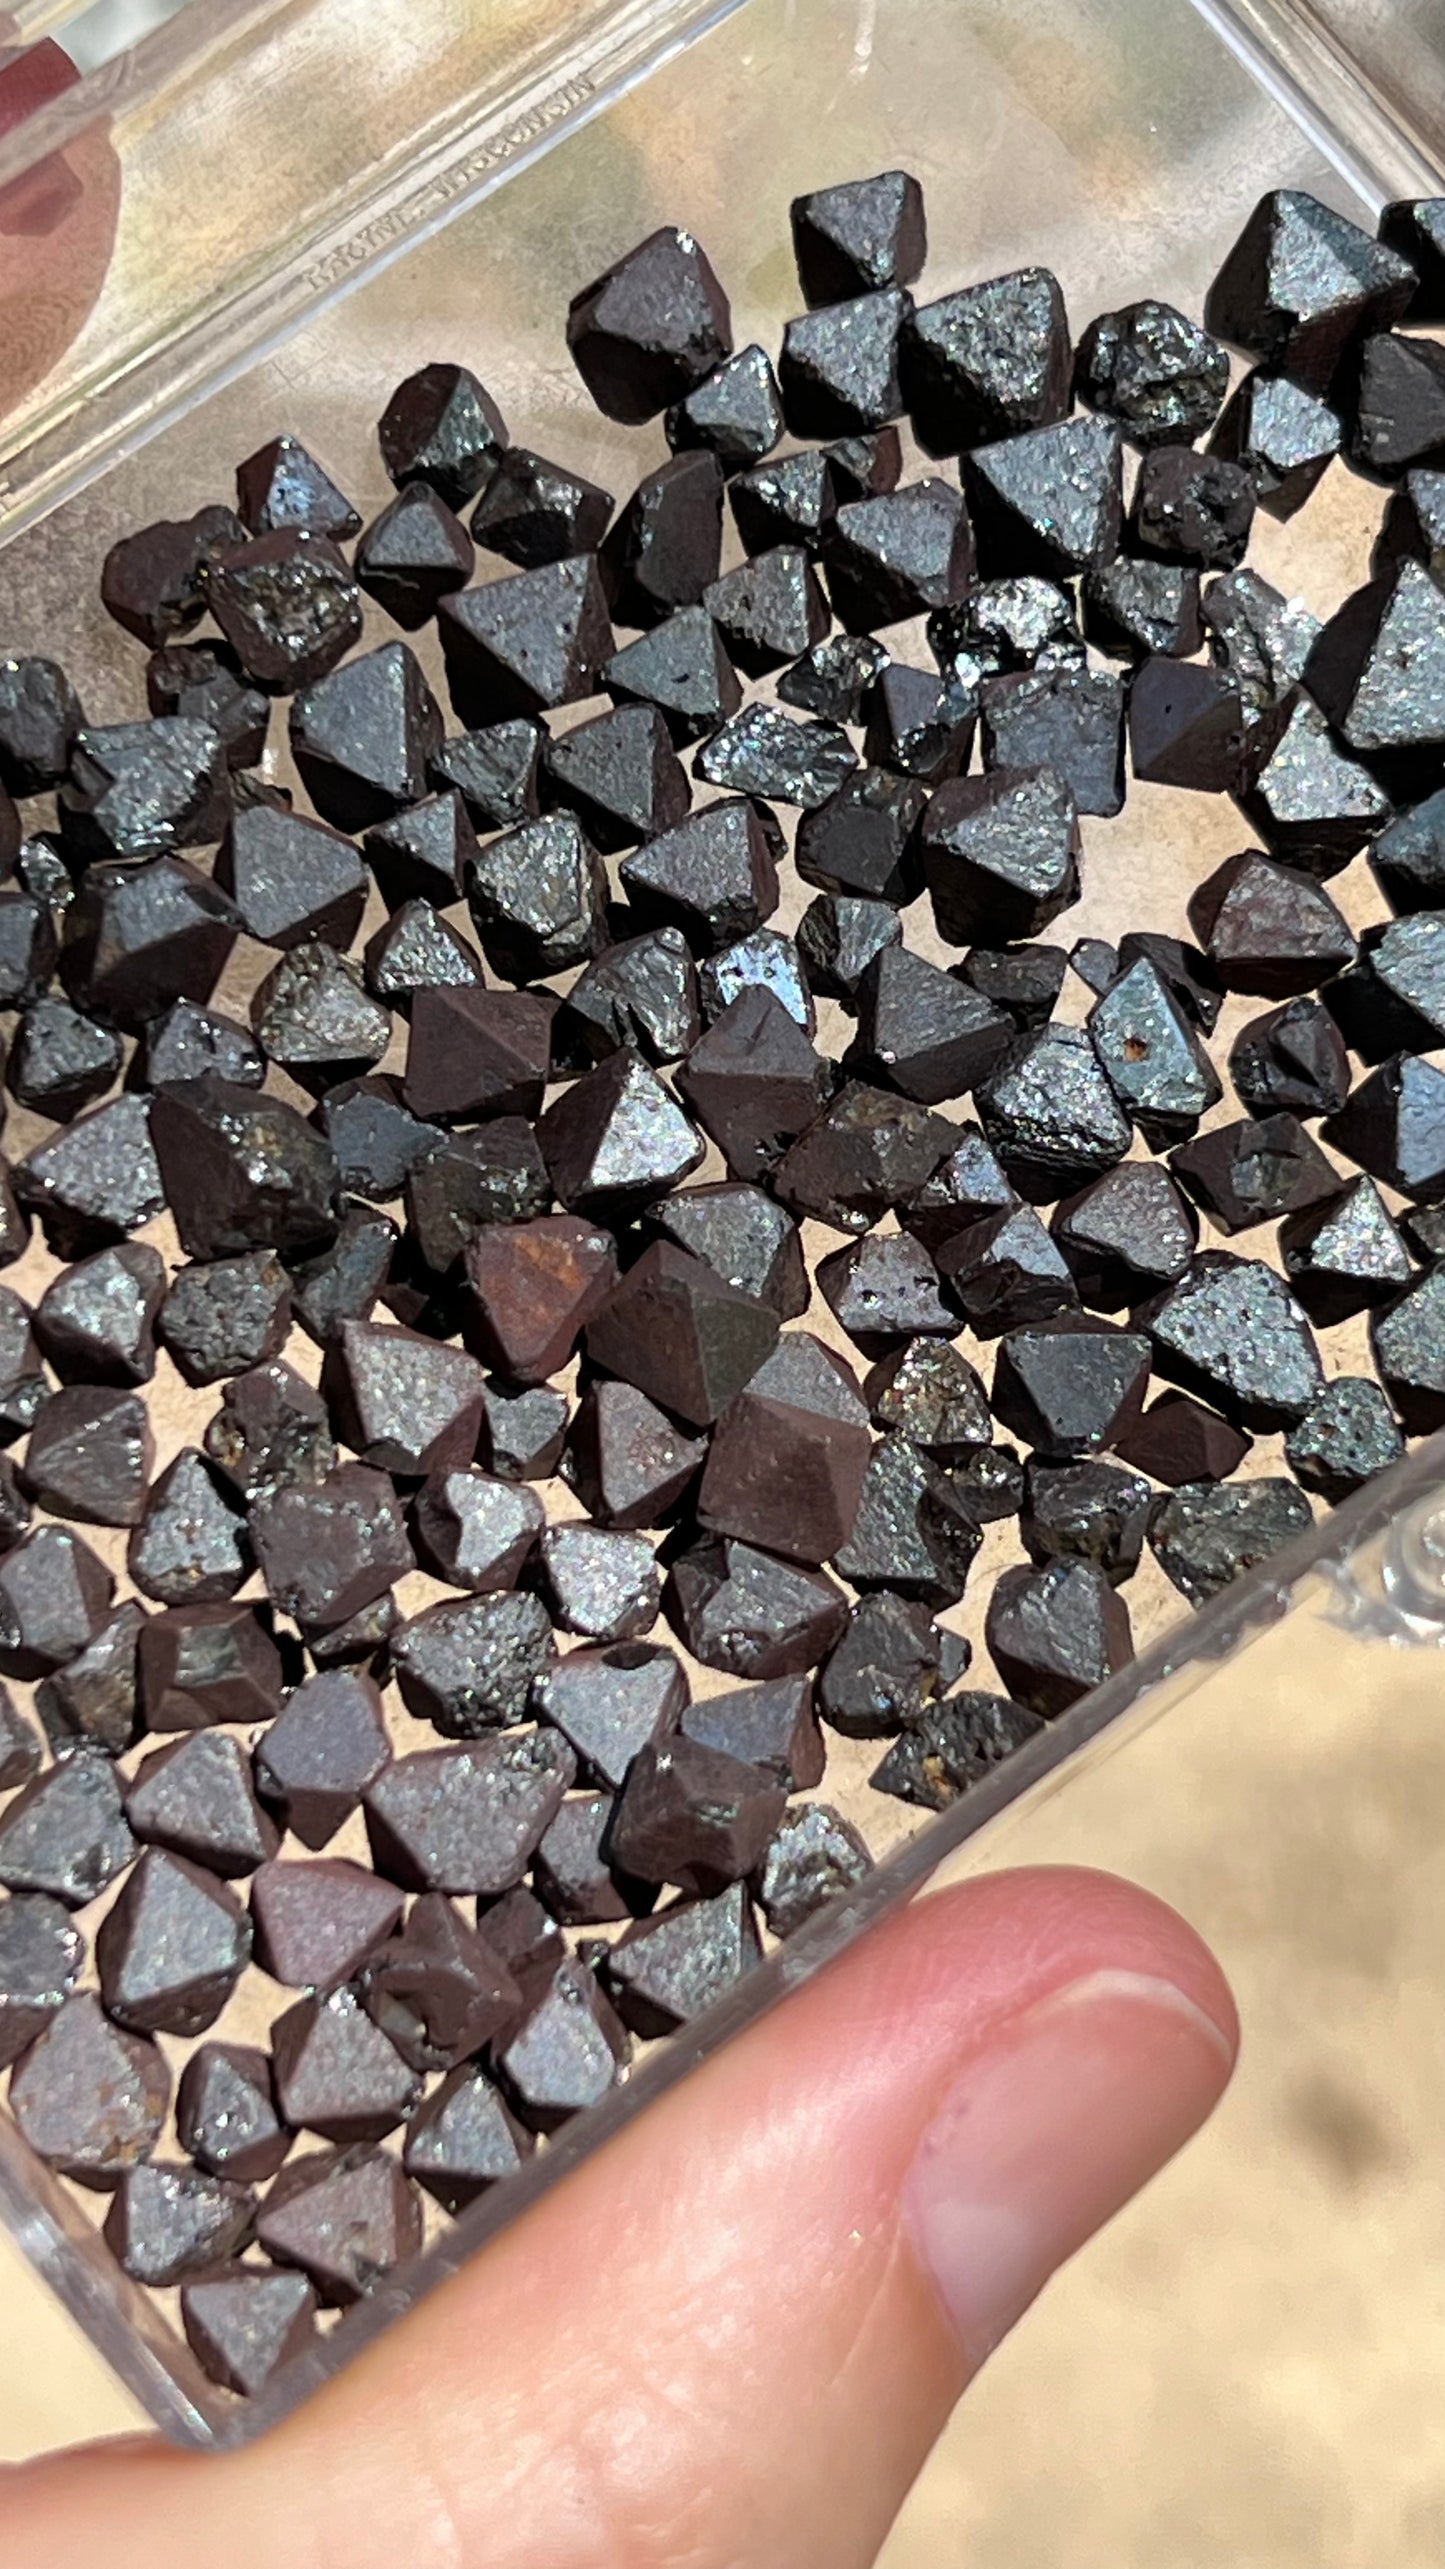 One Magnetite Octahedron Crystal for your Third-eye!